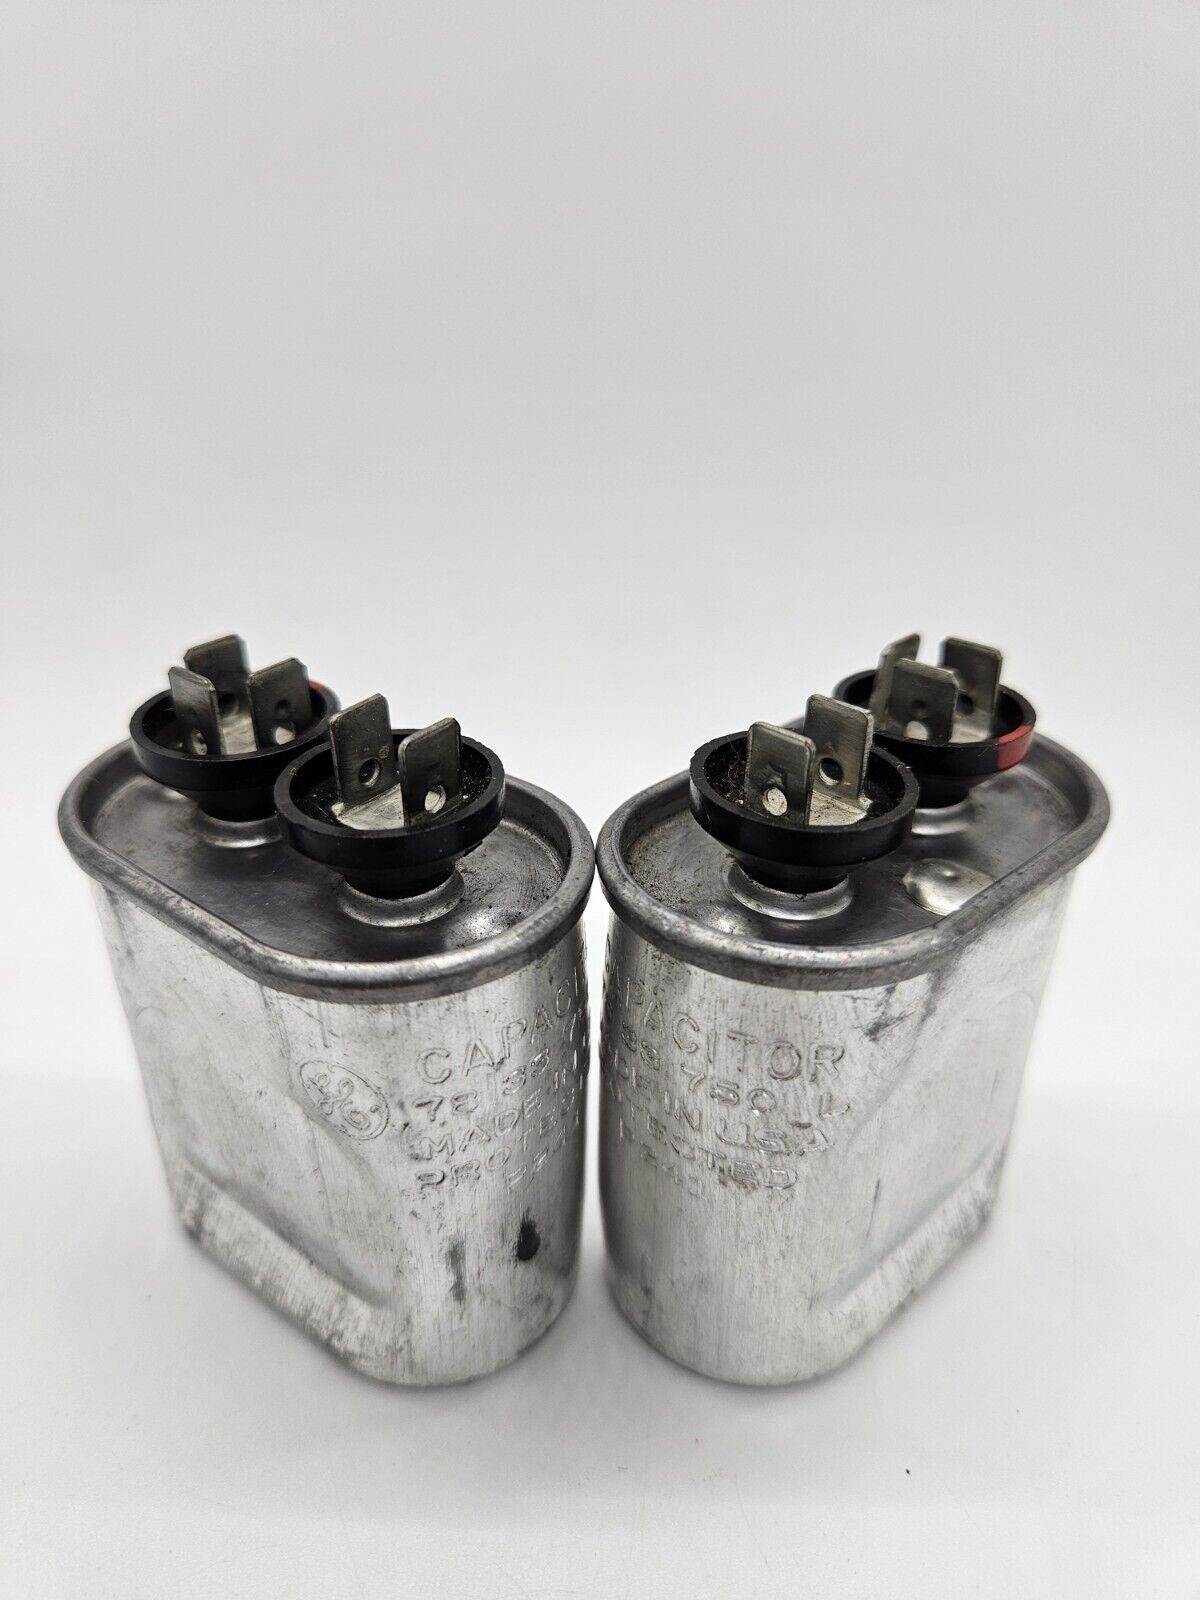 GE 3.5UF 370VAC 60HZ OVAL MOTOR START CAPACITOR USA 21L6085 NEW LOT OF 2